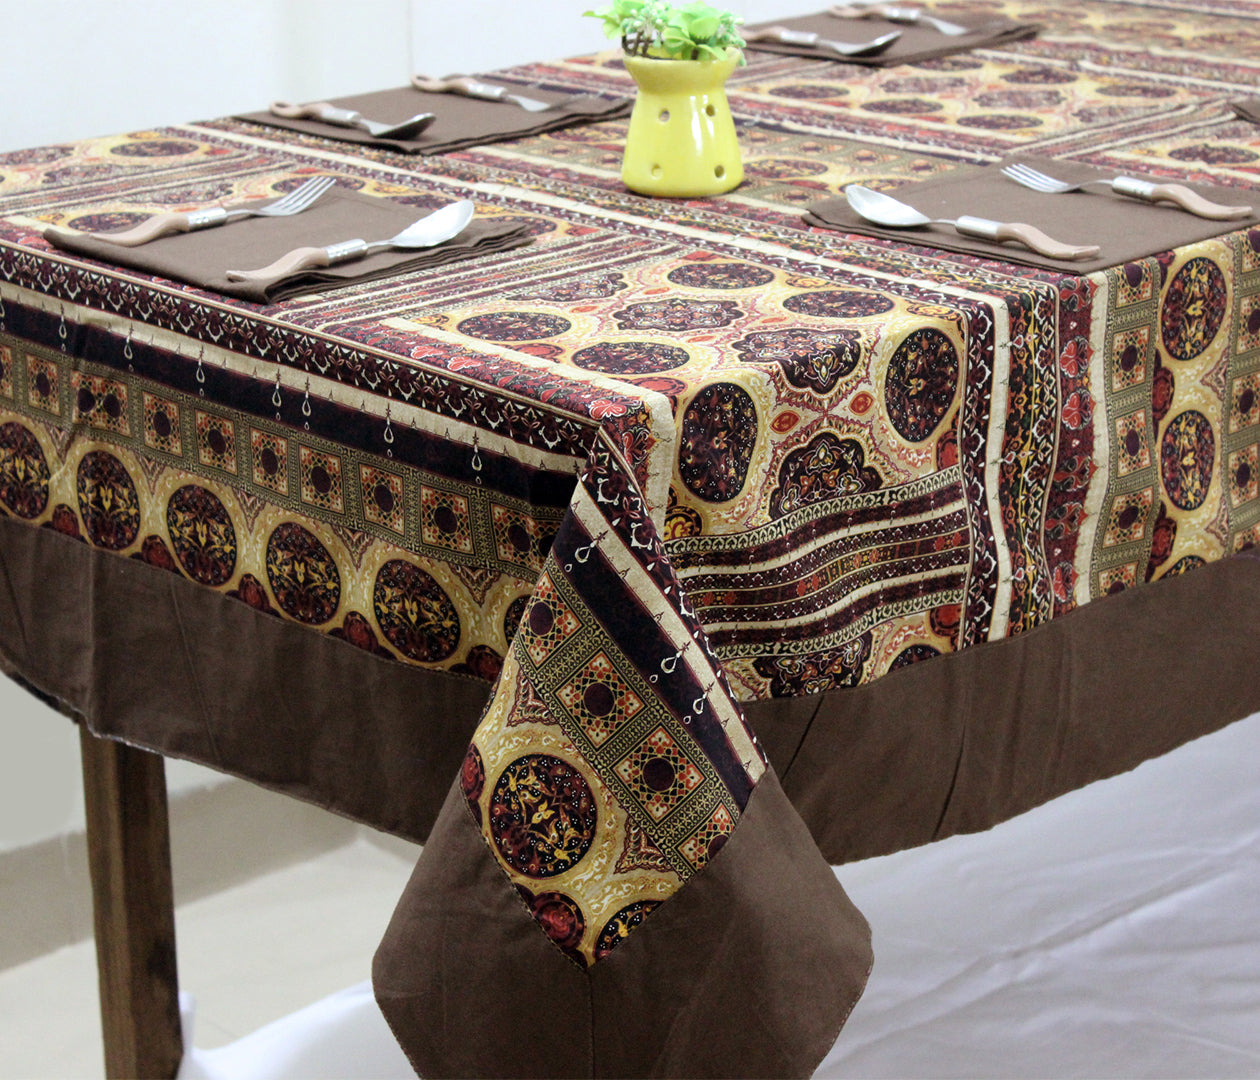 MARVEL Printed Cotton Traditional 1 Pc Table Cover - Brown